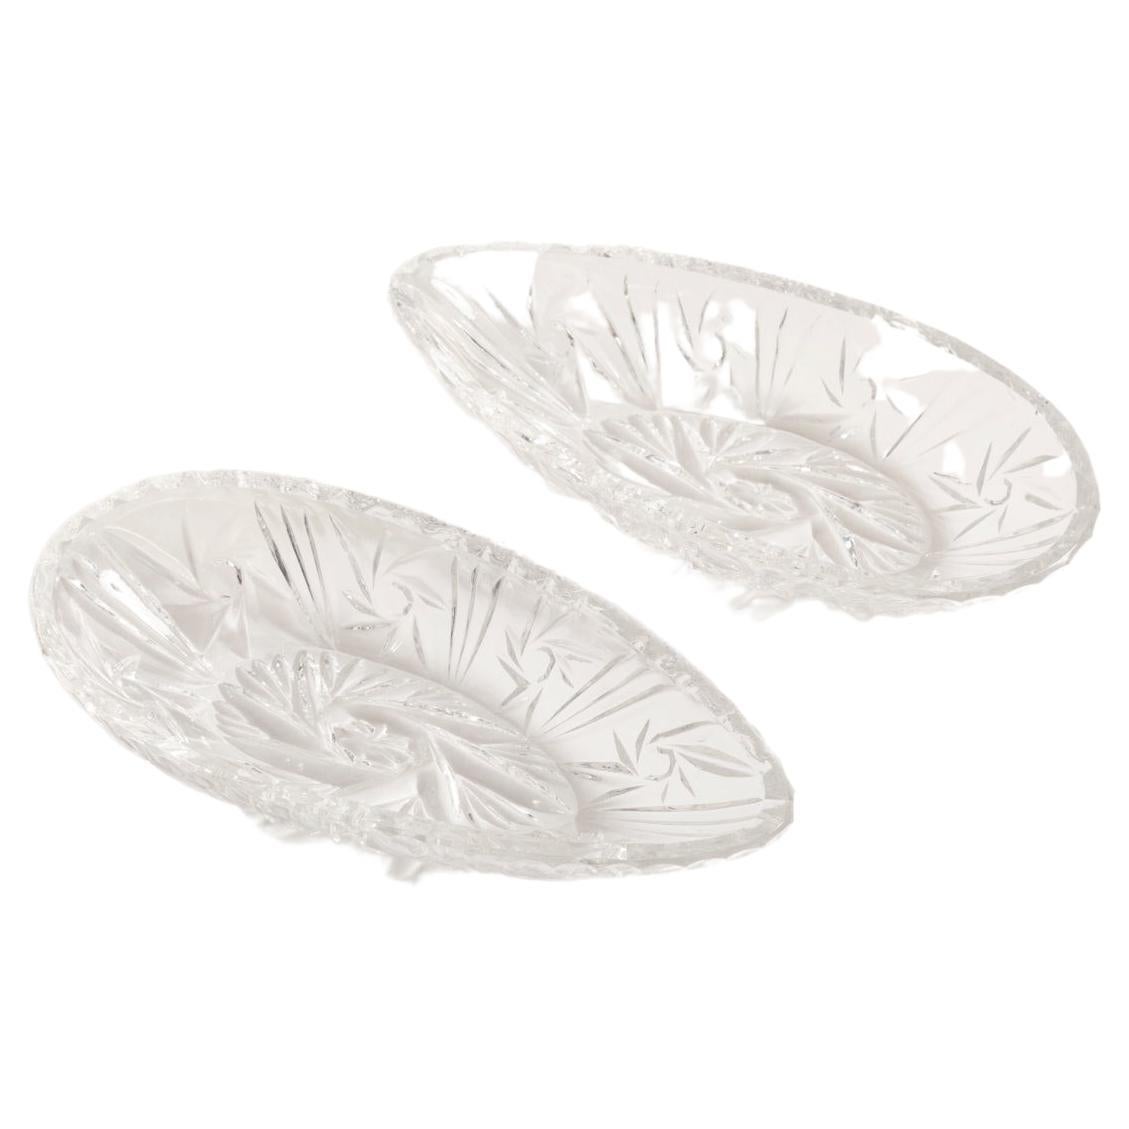 Set of Two Midcentury Transparent Crystal Glass Bowls, France, 1970s For Sale